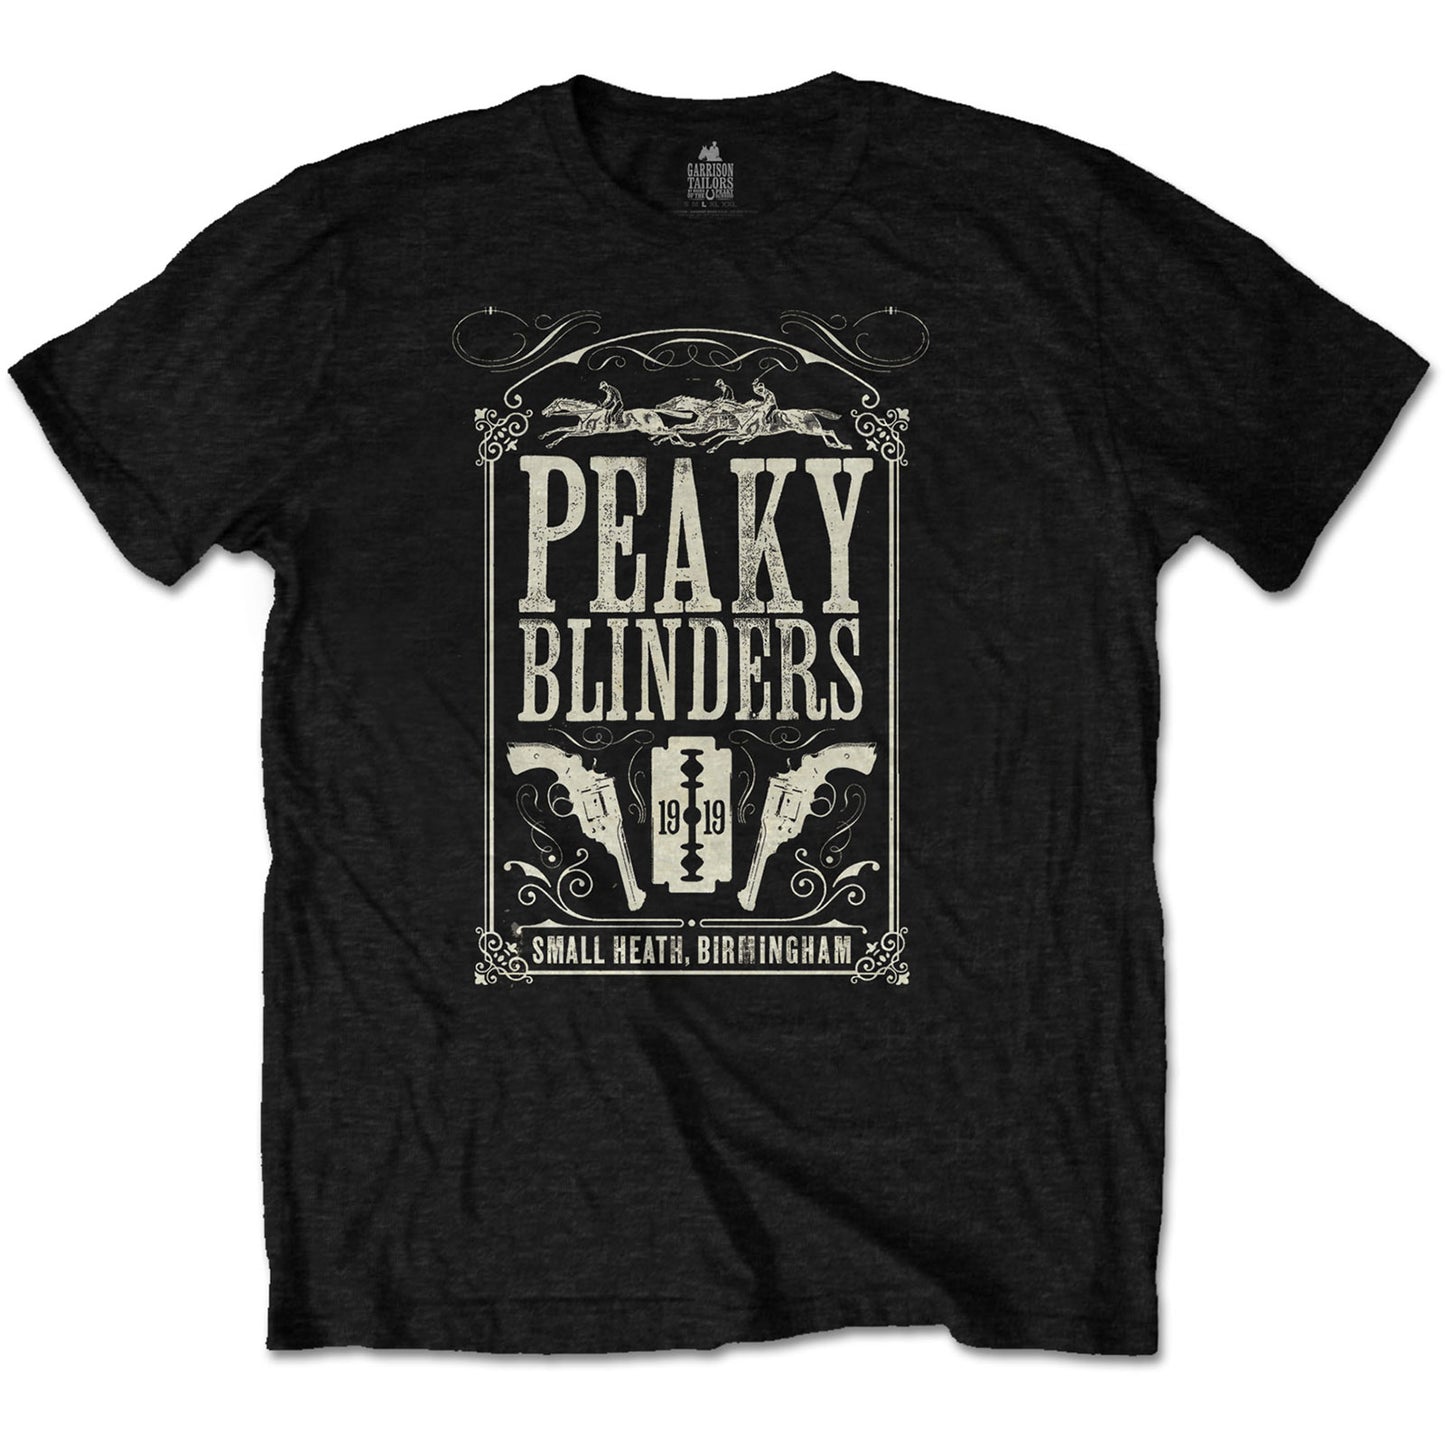 Peaky Blinders T-Shirt: Soundtrack